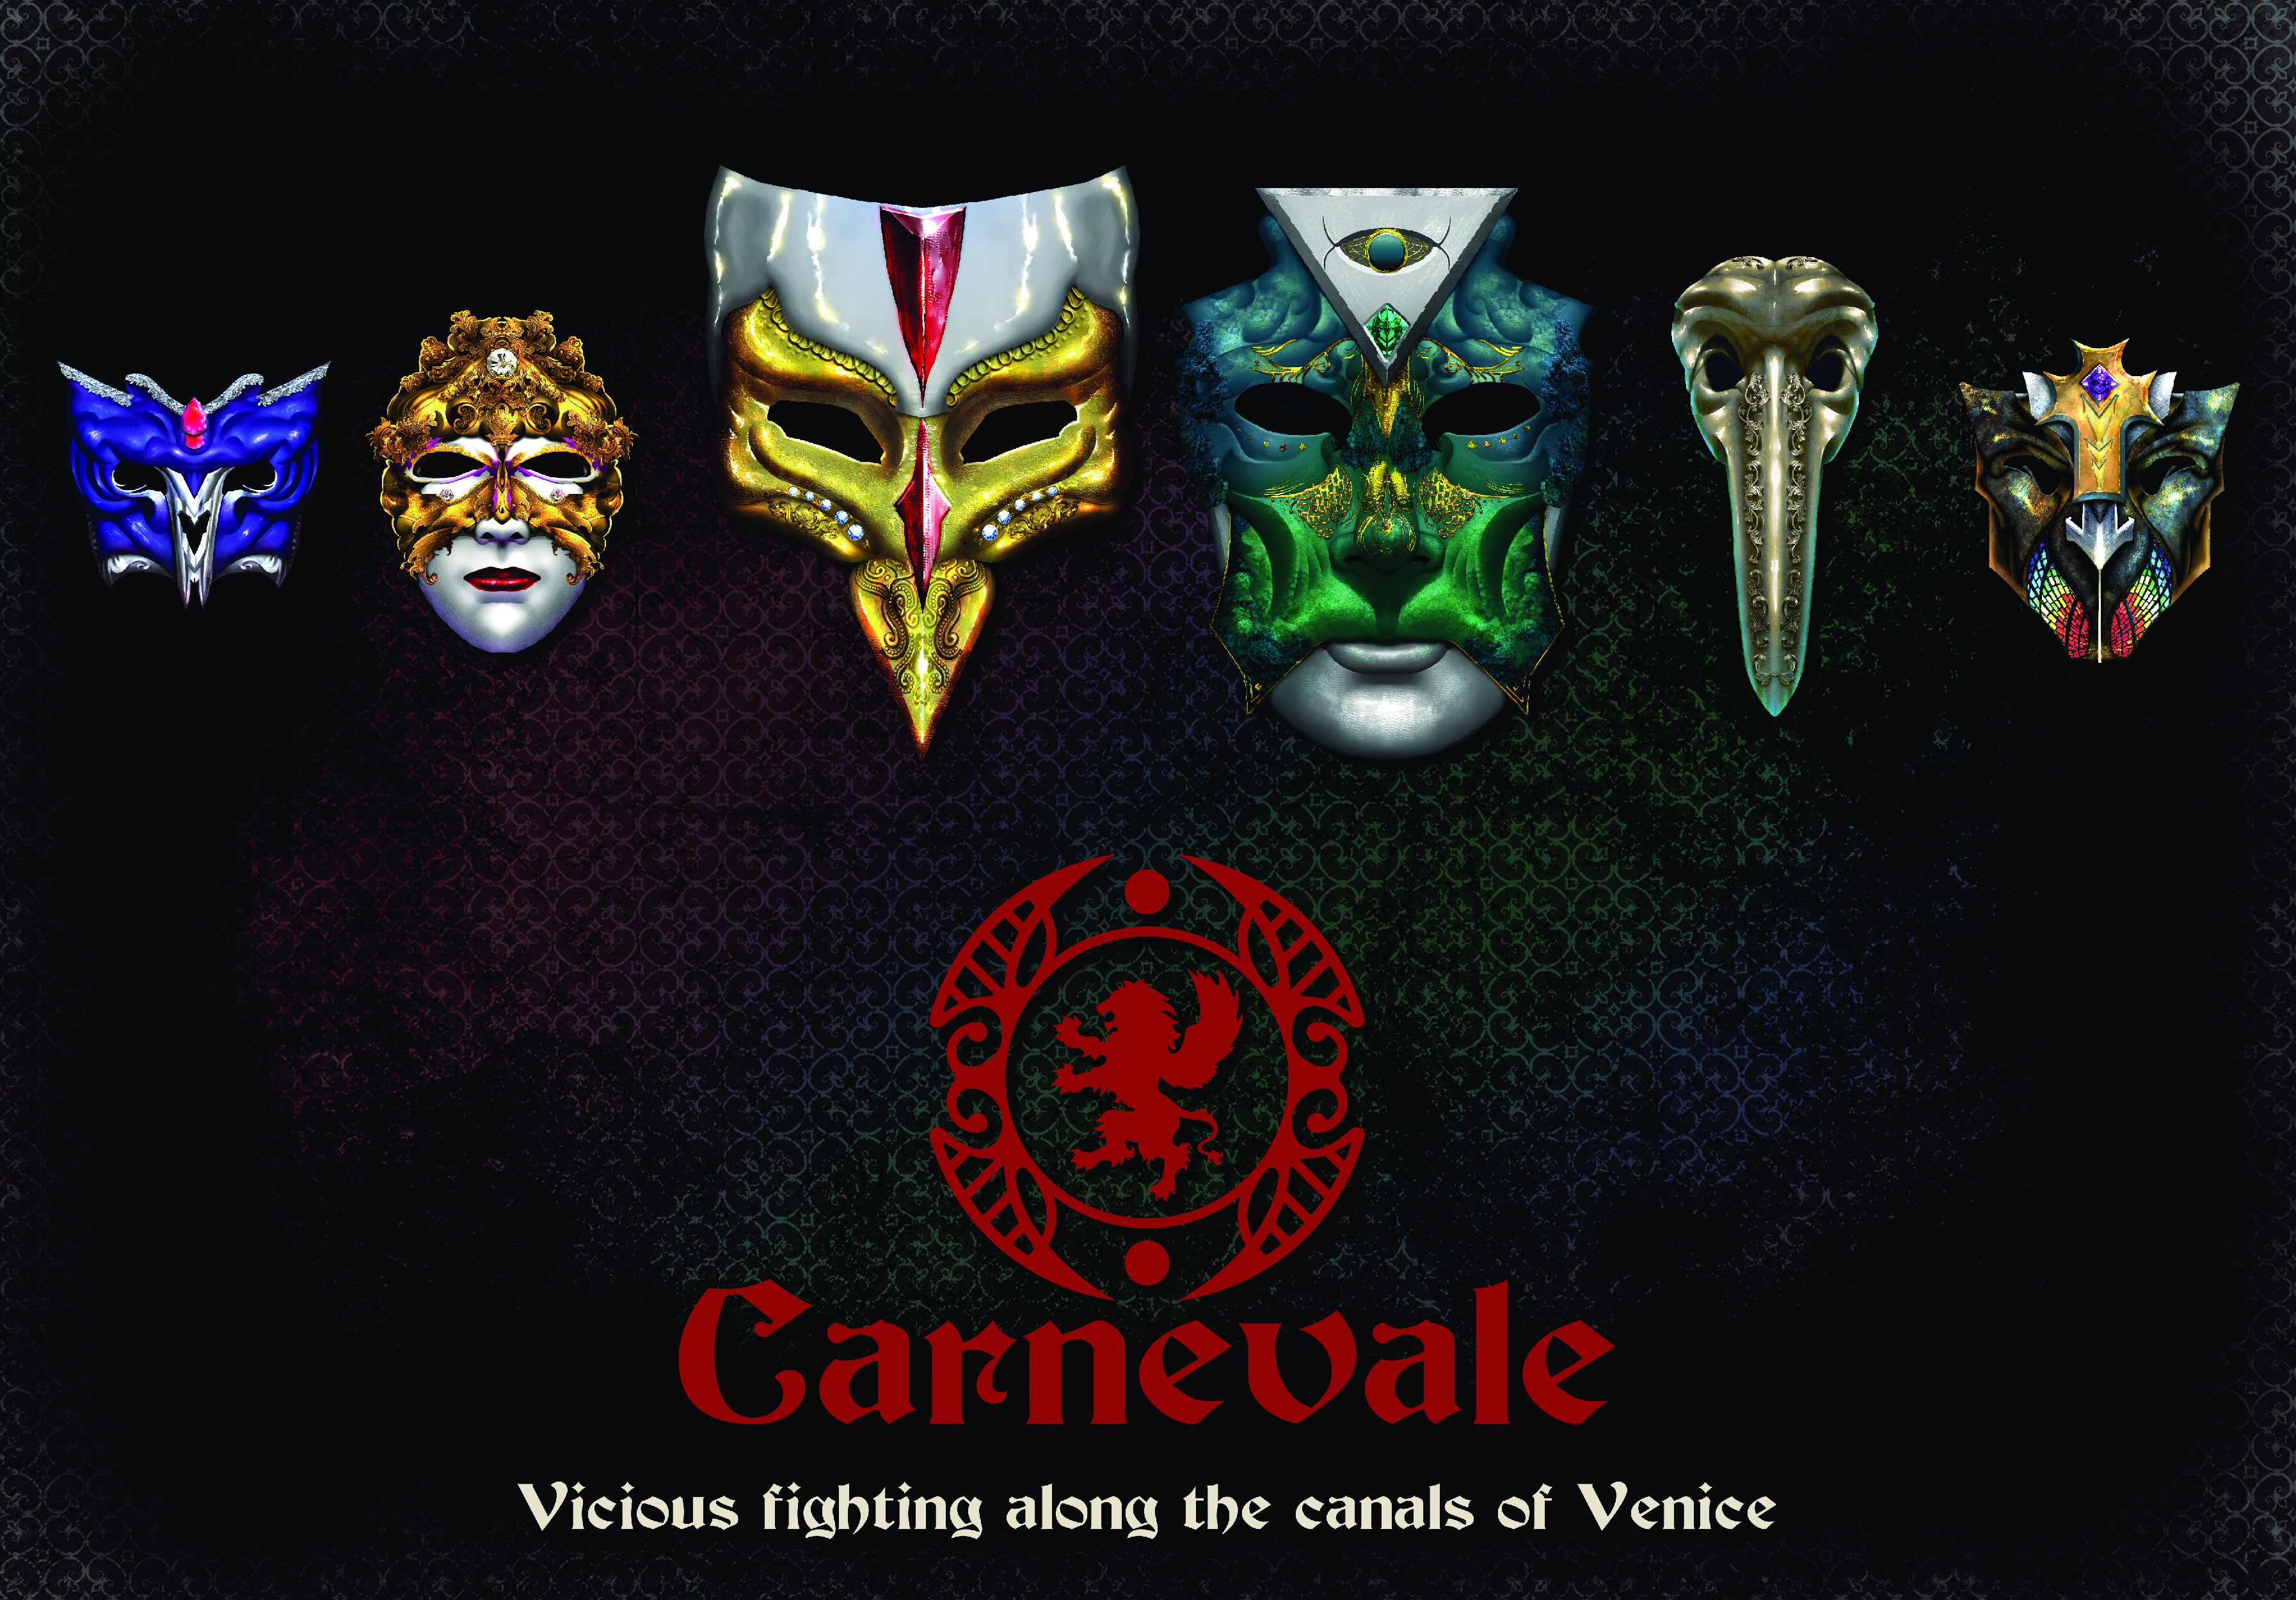 Carnevale: Vicious fighting along the canals of Venice